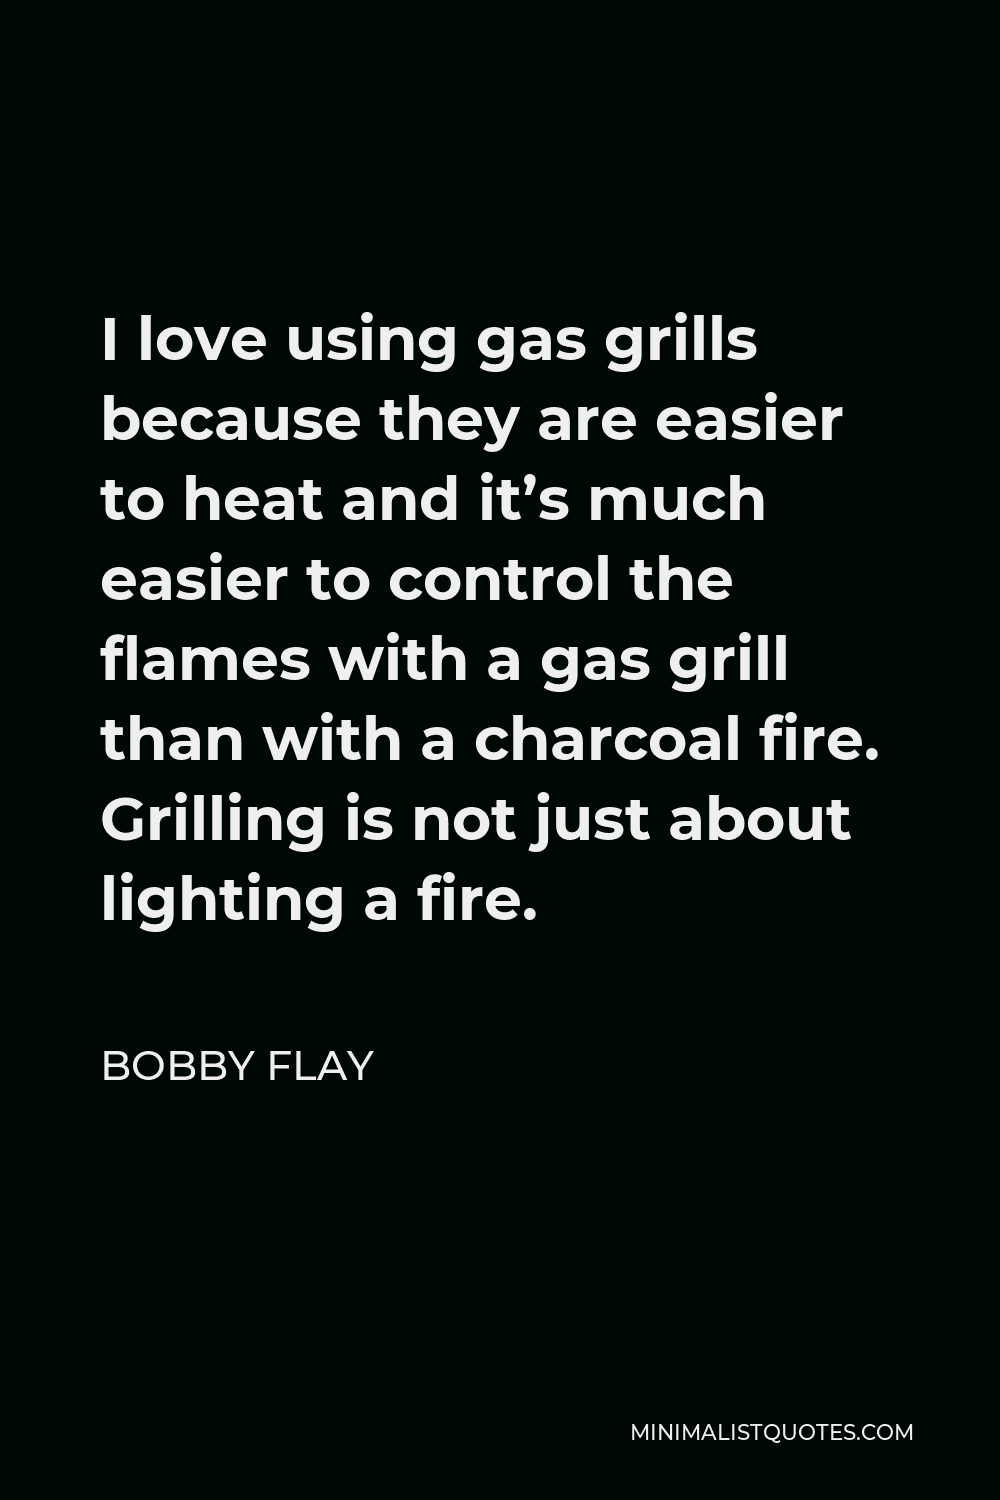 Bobby Flay Quote - I love using gas grills because they are easier to heat and it’s much easier to control the flames with a gas grill than with a charcoal fire. Grilling is not just about lighting a fire.